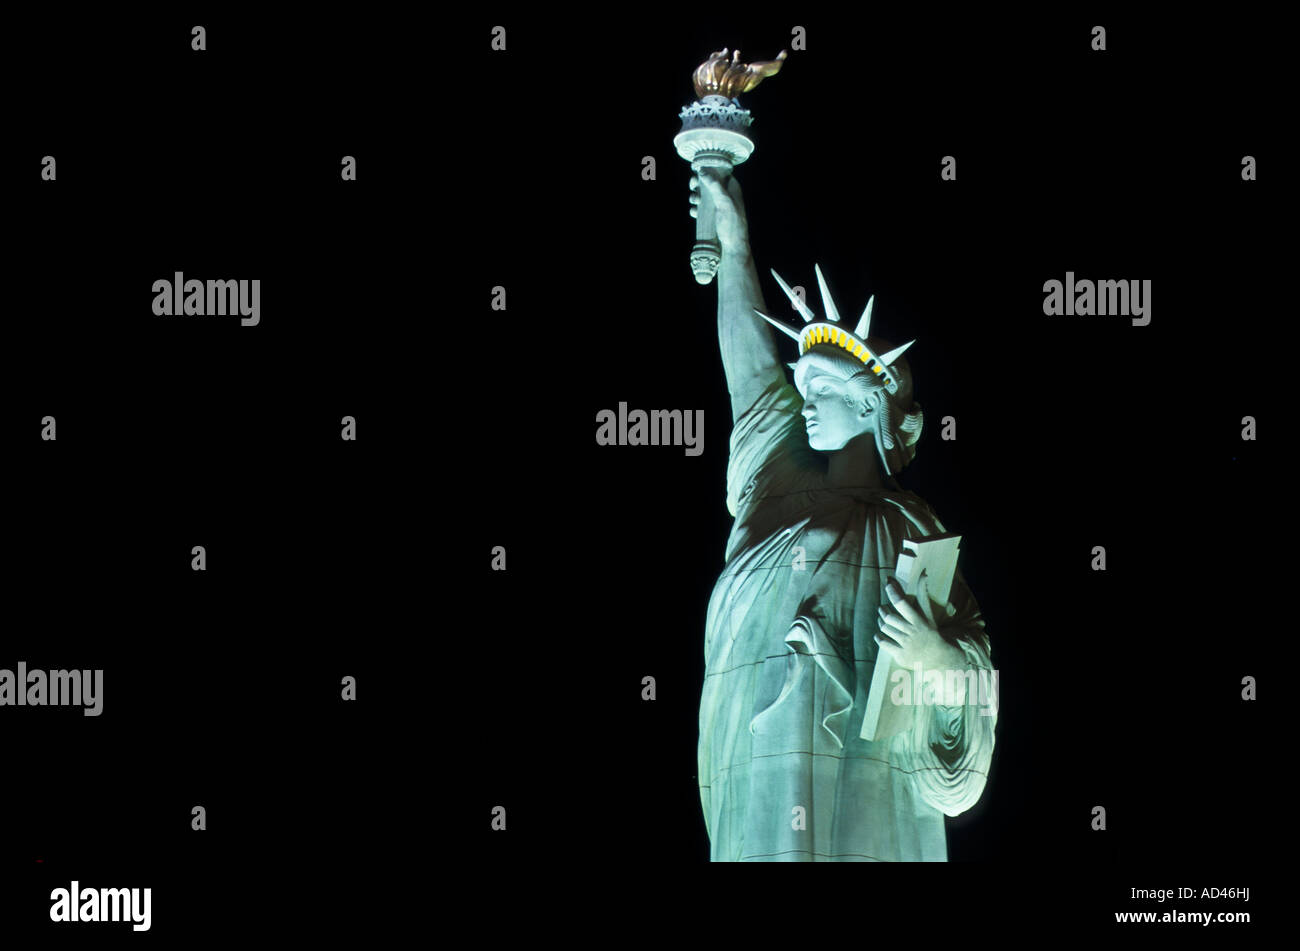 Statue of liberty of the Hotel and Casino New York, Las Vegas, Nevada, United States of America, USA Stock Photo